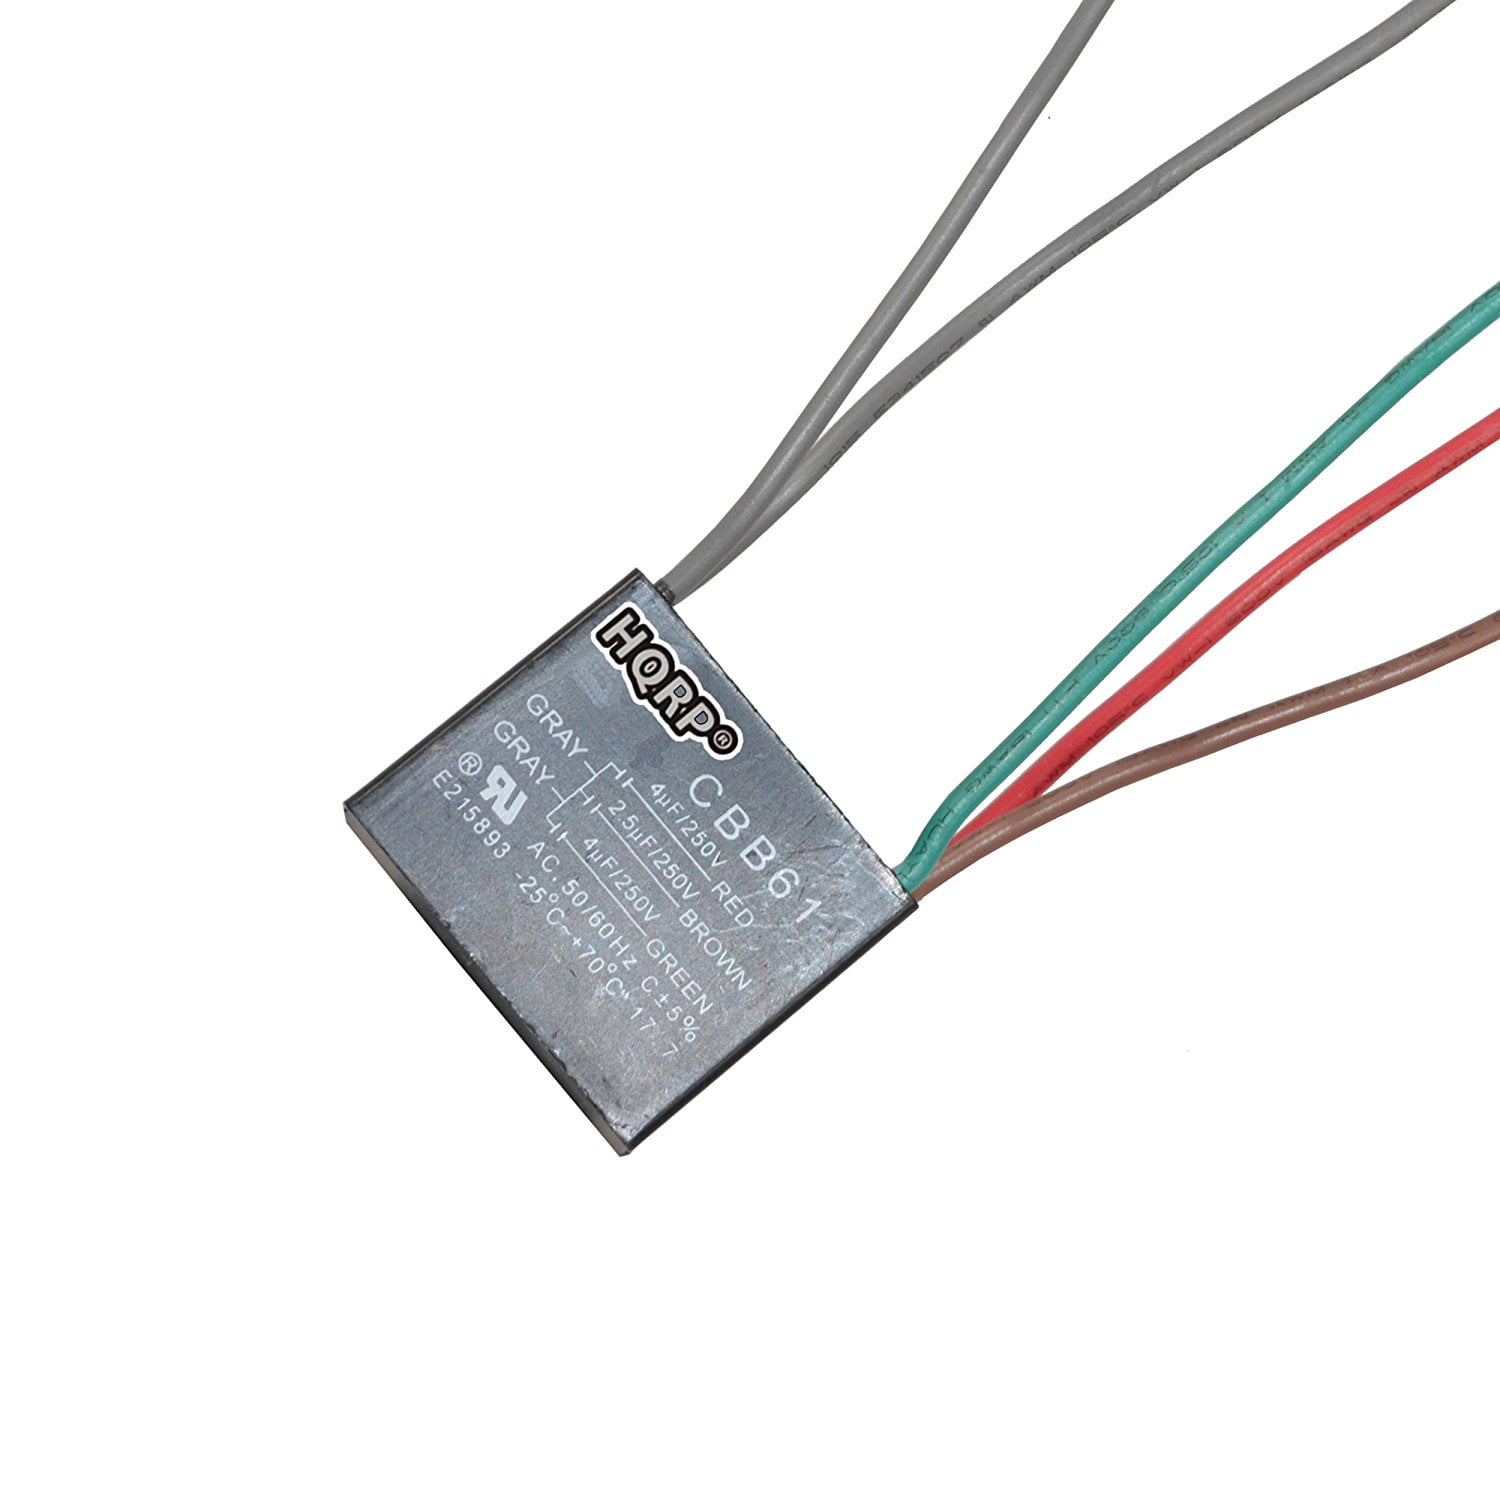 HQRP Capacitor Compatible with Hampton Bay Ceiling Fan 4uf+5uf+6uf 5-Wire CBB61 